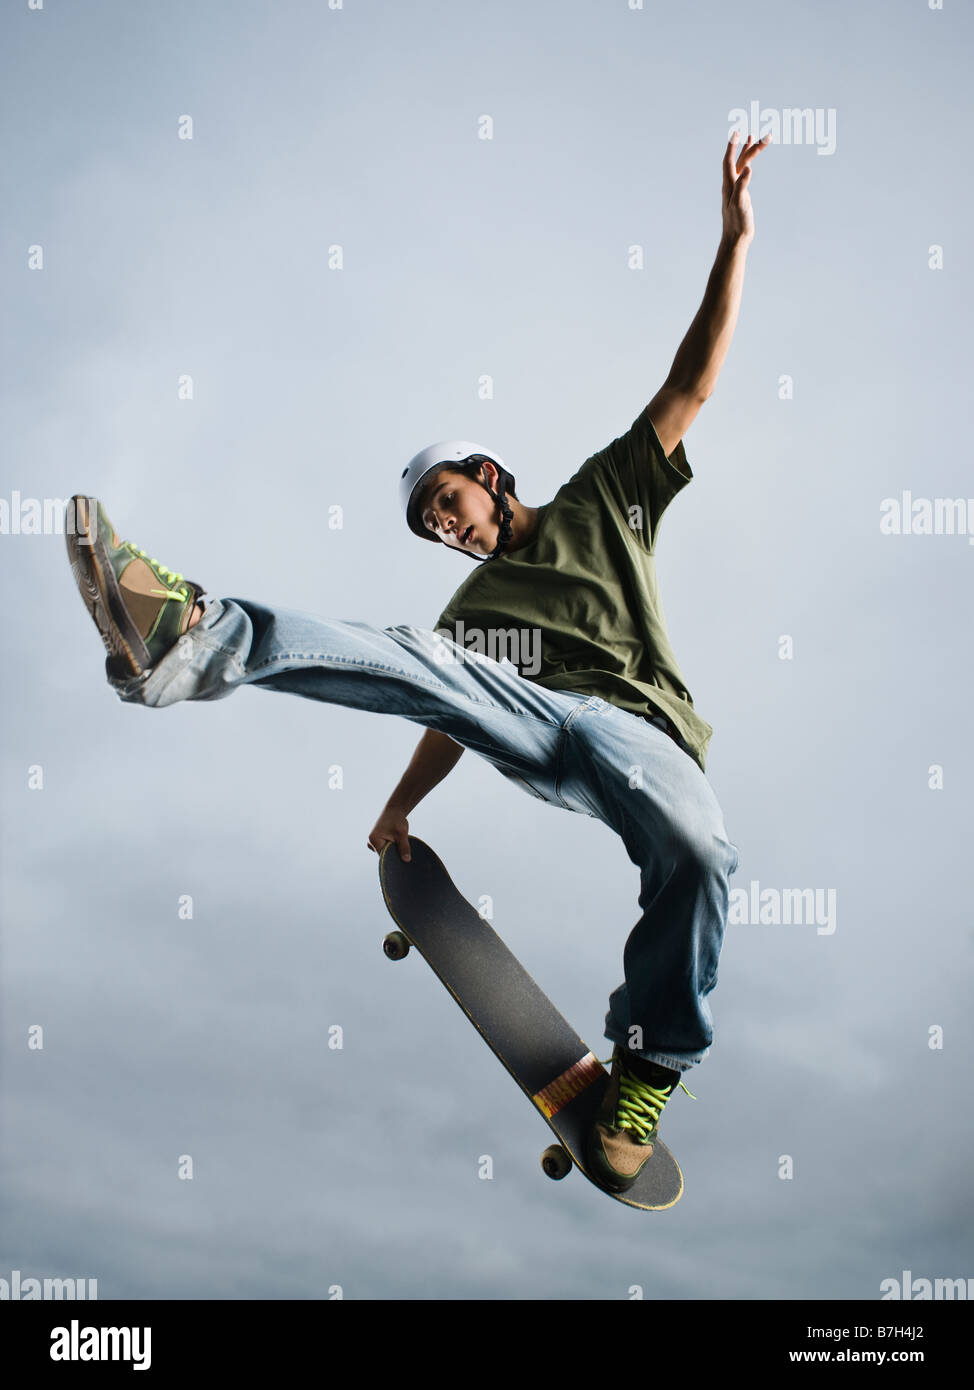 Mixed race teenager in mid-air on skateboard Stock Photo